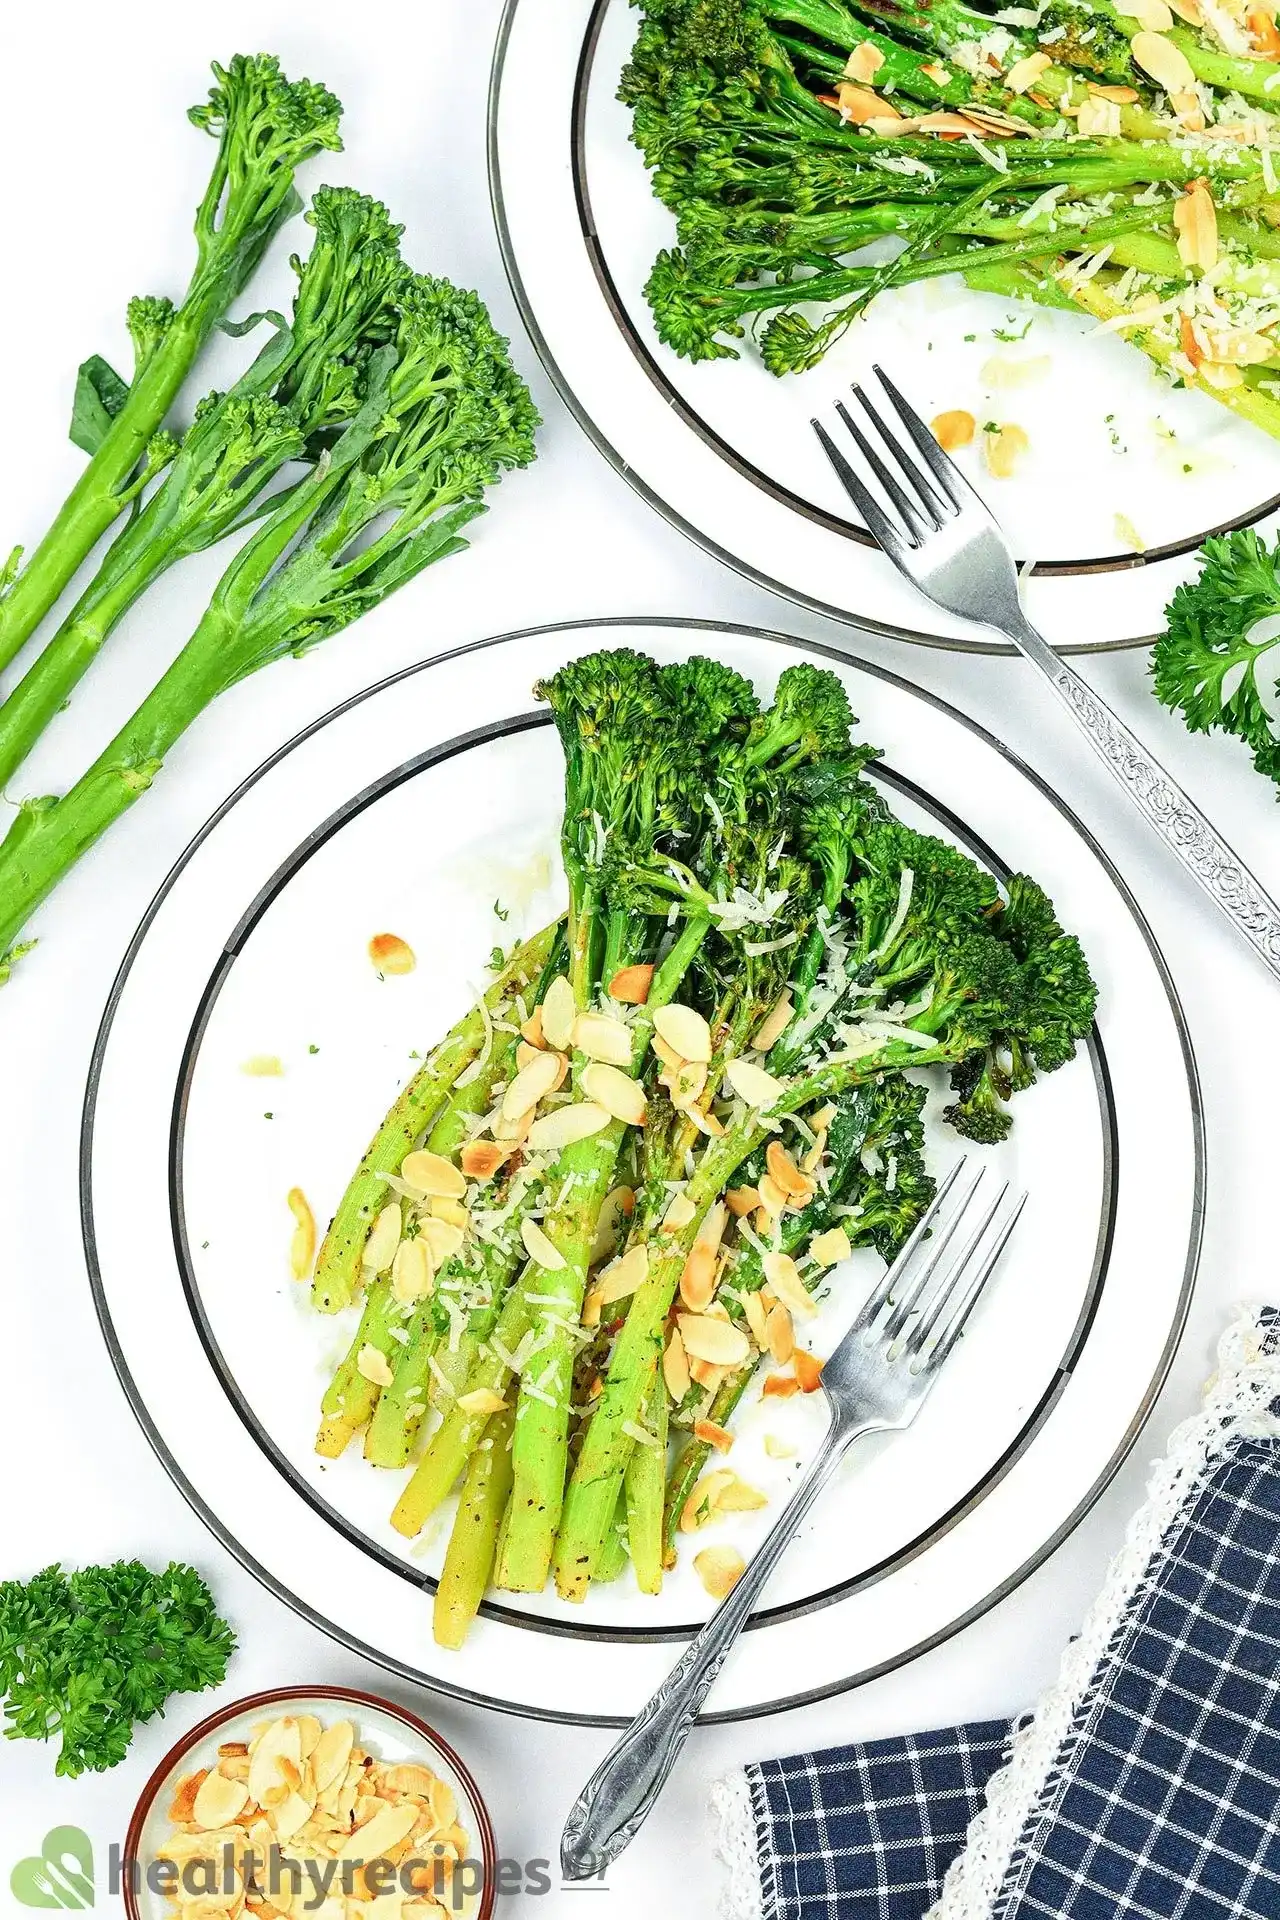 Roasted Baby Broccoli Recipe: An Exciting Way to Enjoy Broccoli